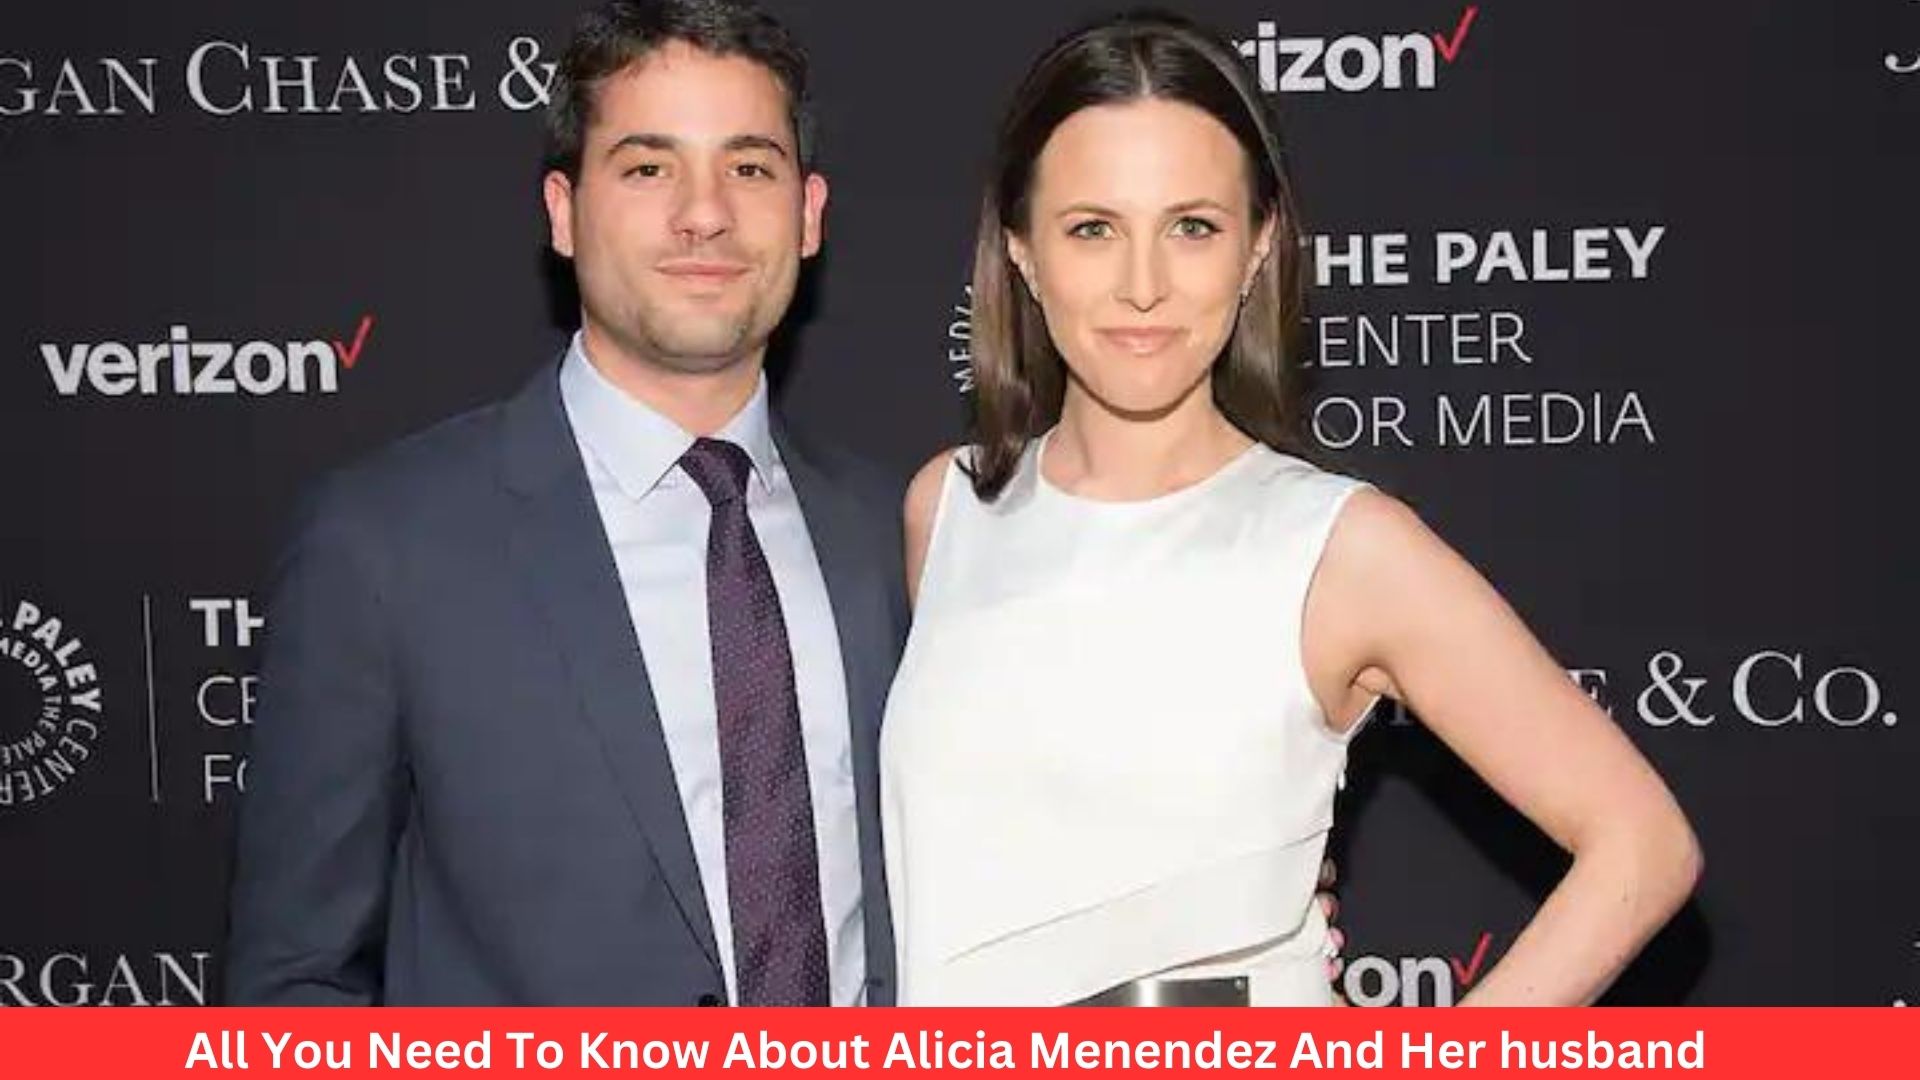 All You Need To Know About Alicia Menendez And Her husband